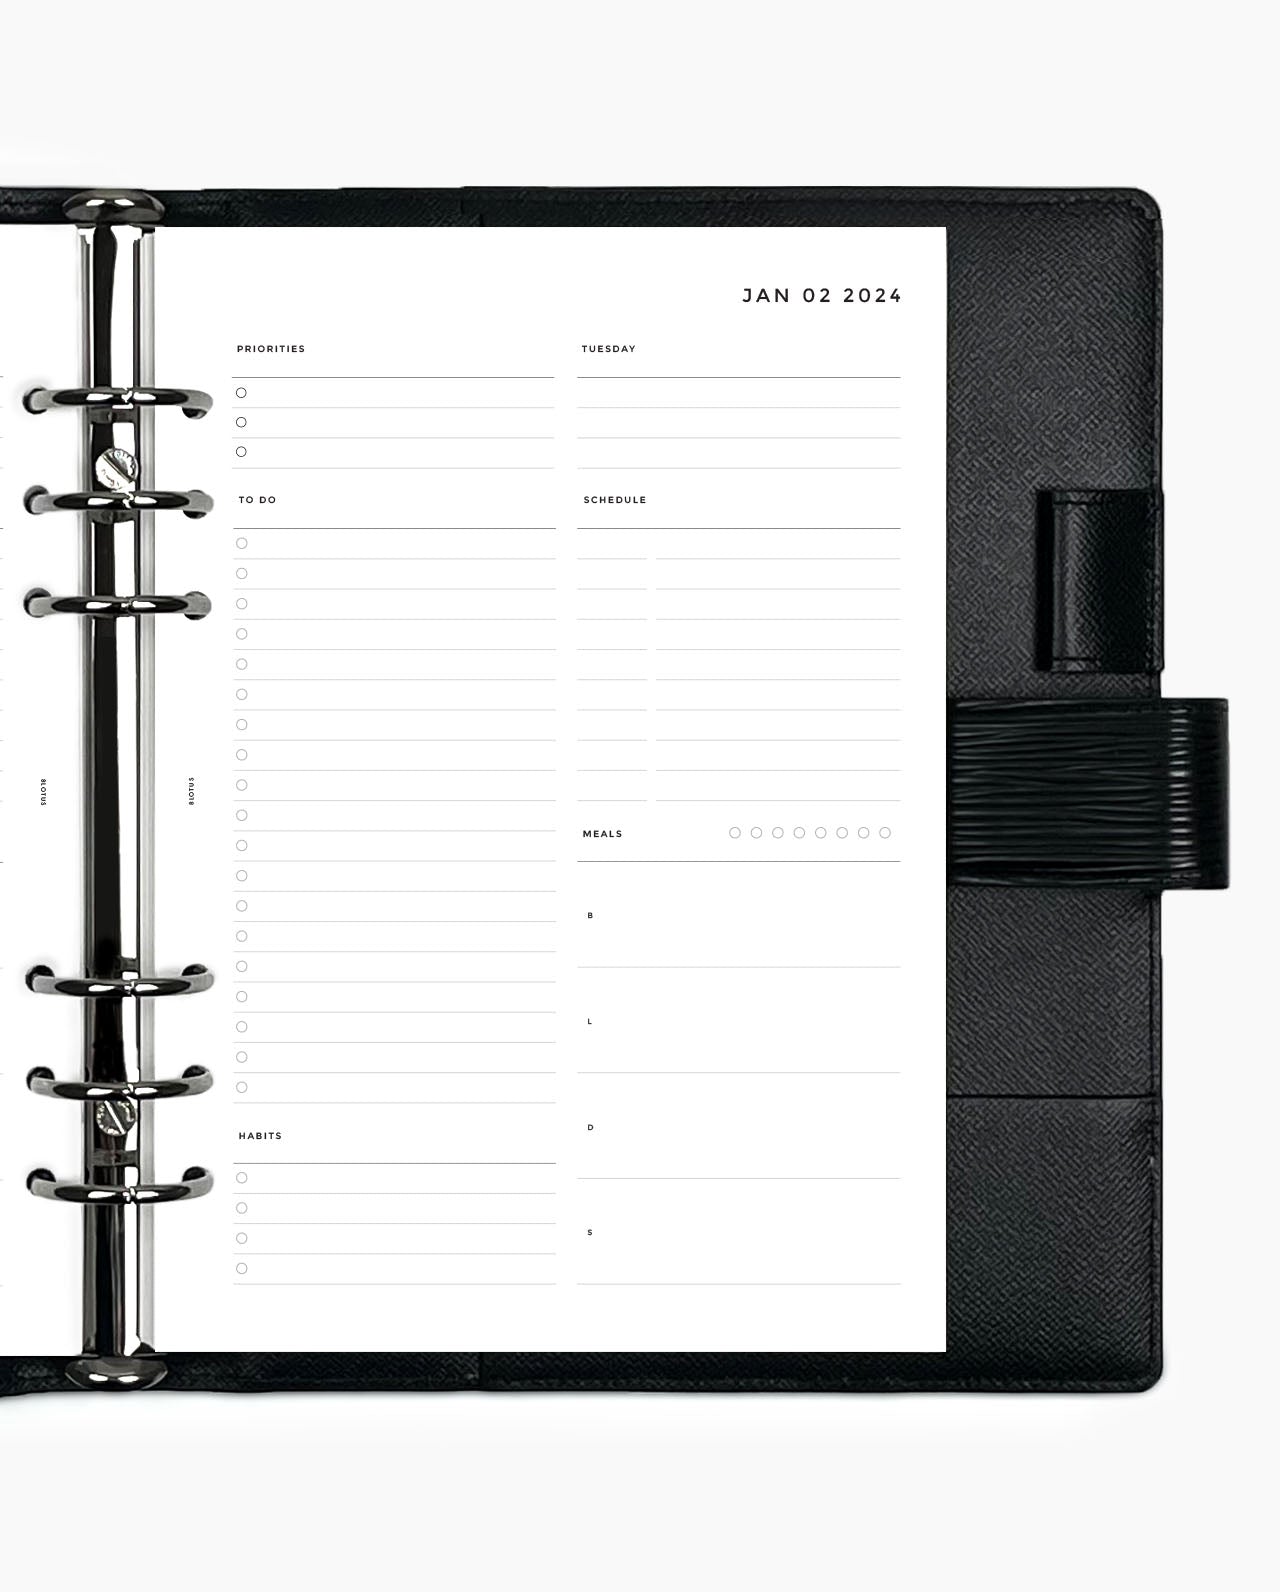 MN040 - 2024 Daily Meals & Habits Planner Inserts - DO1P